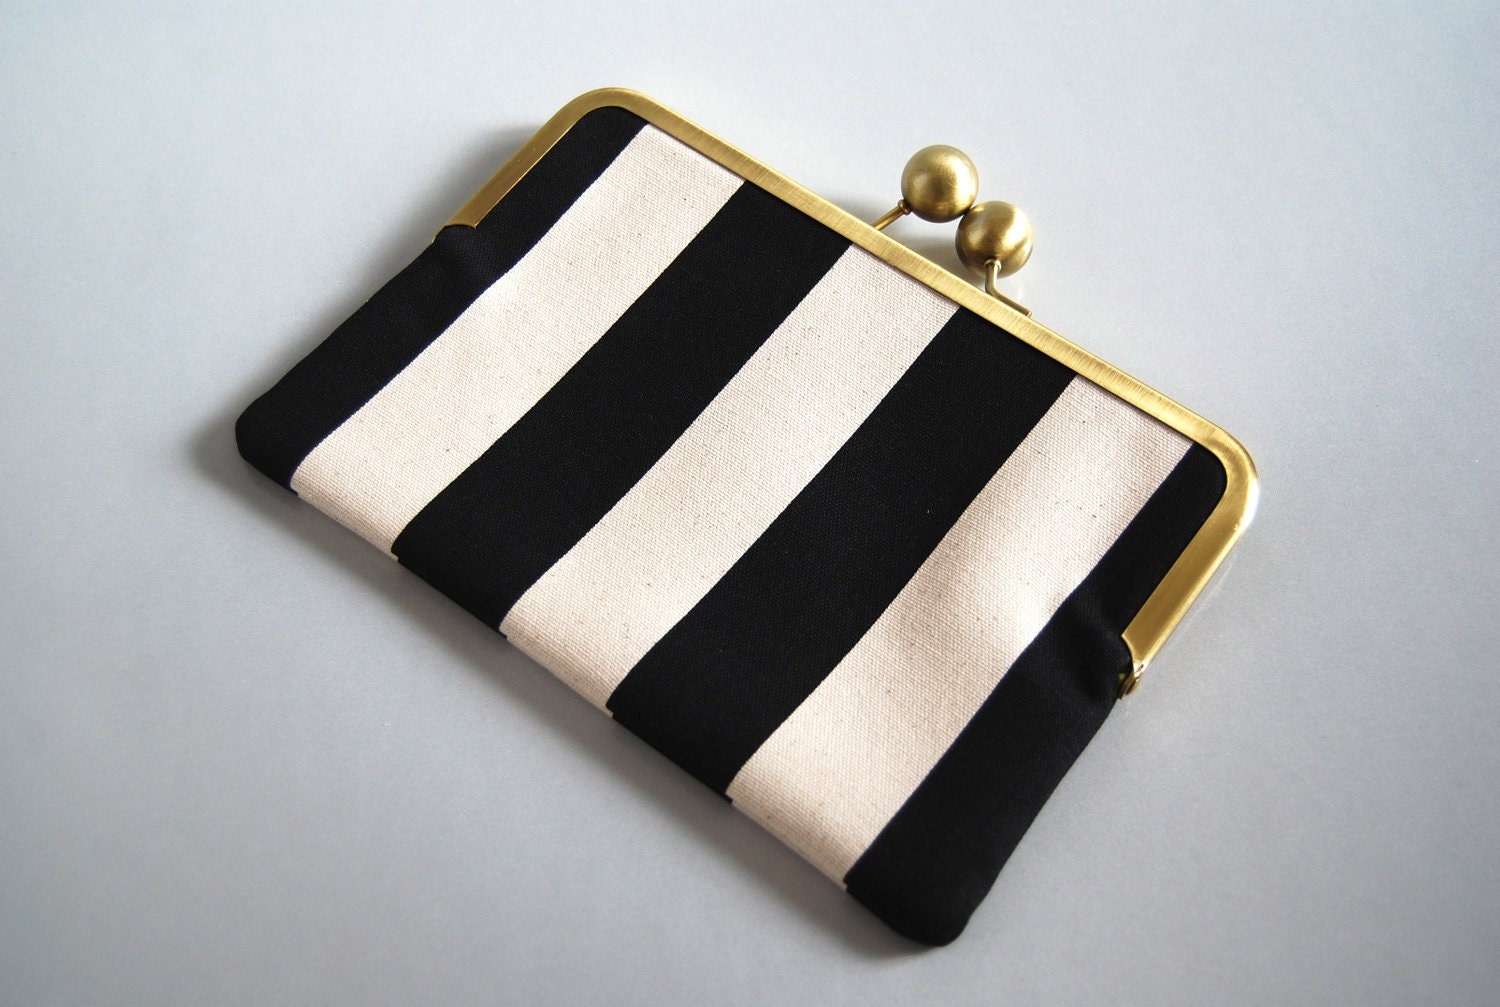 Unique and Stylish eReader / Kindle / Sony / Nook Clutch Case "Black Stripes"